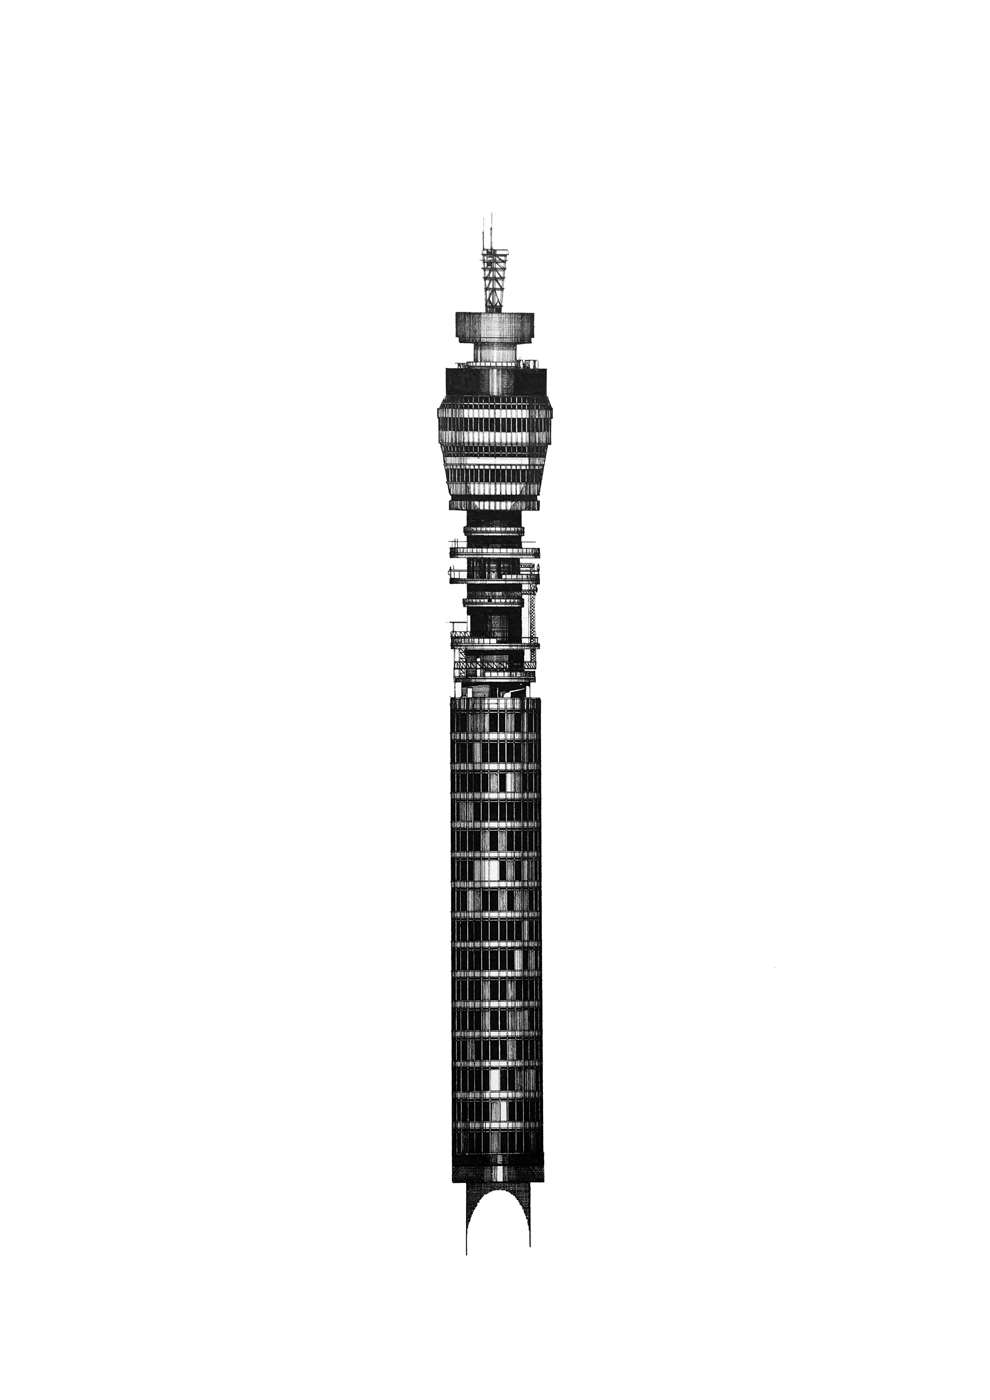 Nick Coupland, Hyper-realistic detailed pen and ink architecture illustration of the BT Tower. 